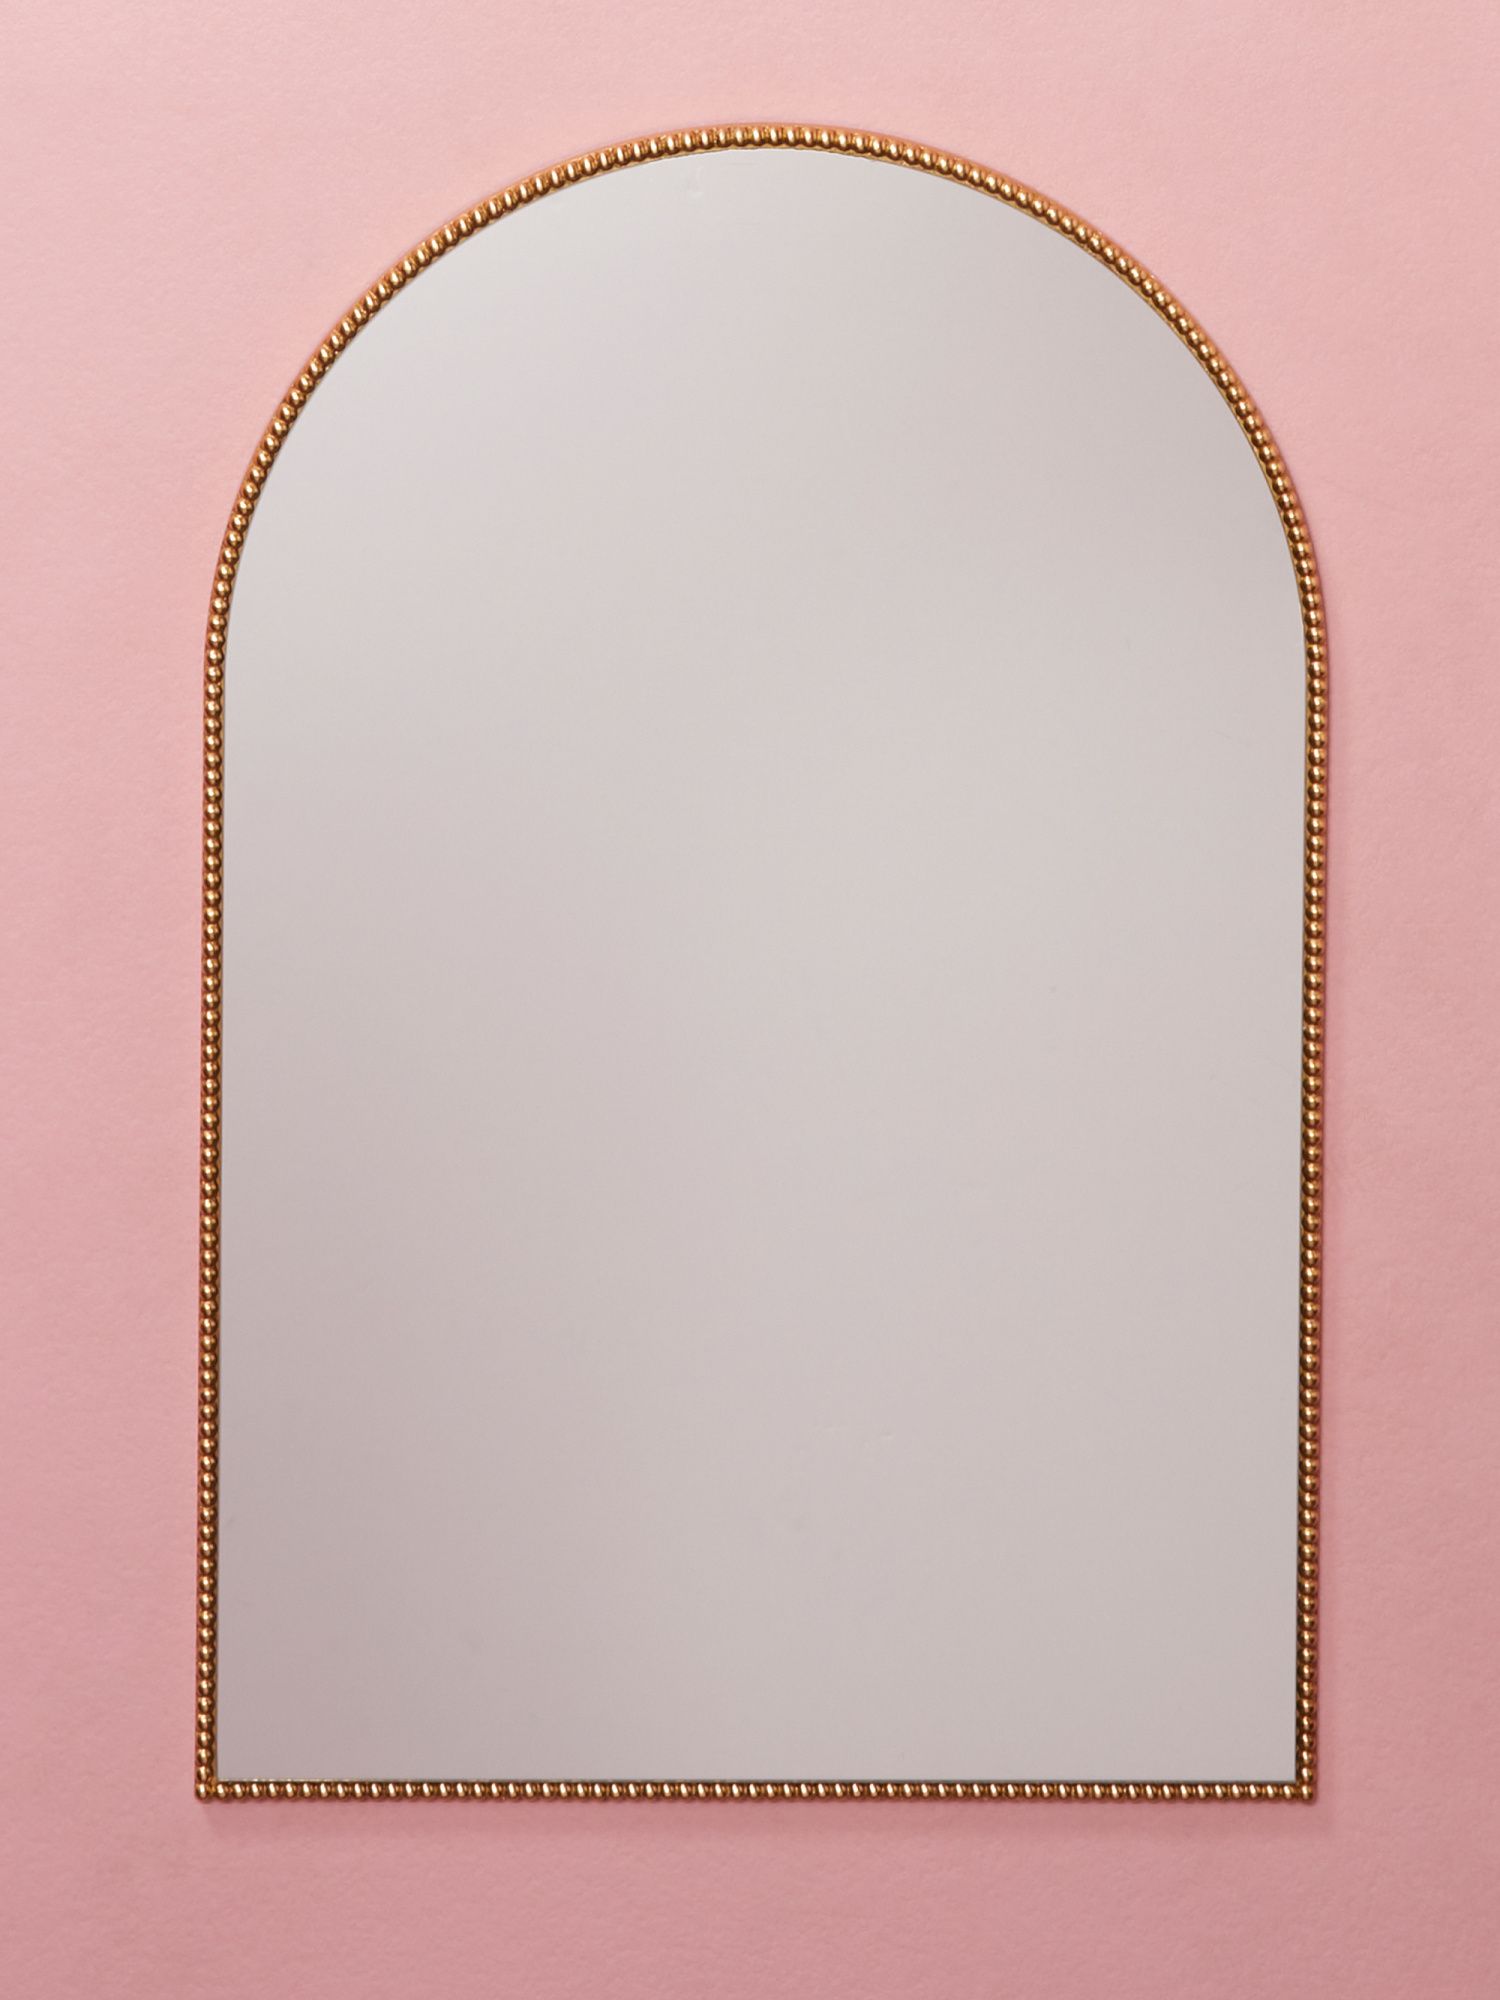 24x36 Arch Top Wall Mirror In Foiled Frame | HomeGoods